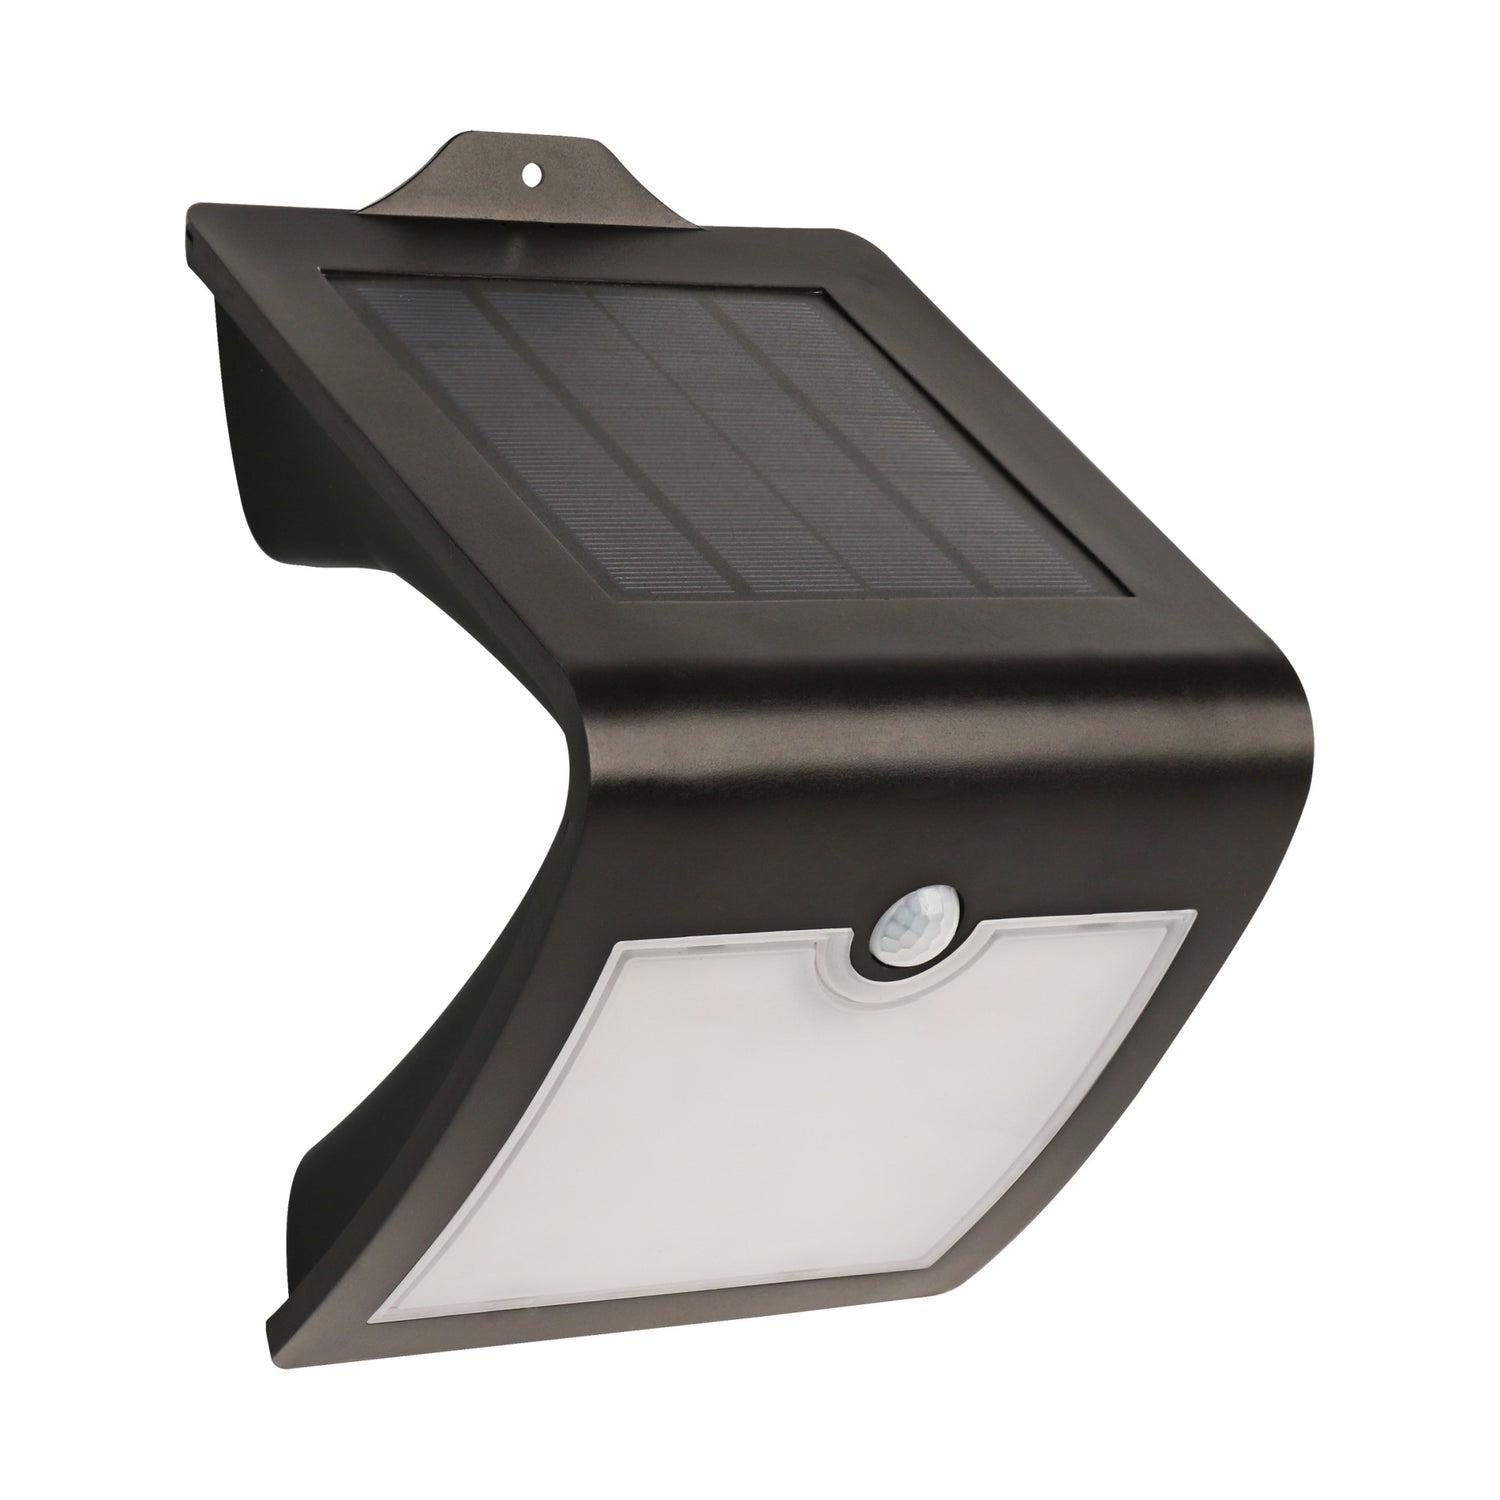 Black V-Shape Solar Powered LED Security Light with Dusk to Dawn and Motion Sensor in Daylight (5000K)